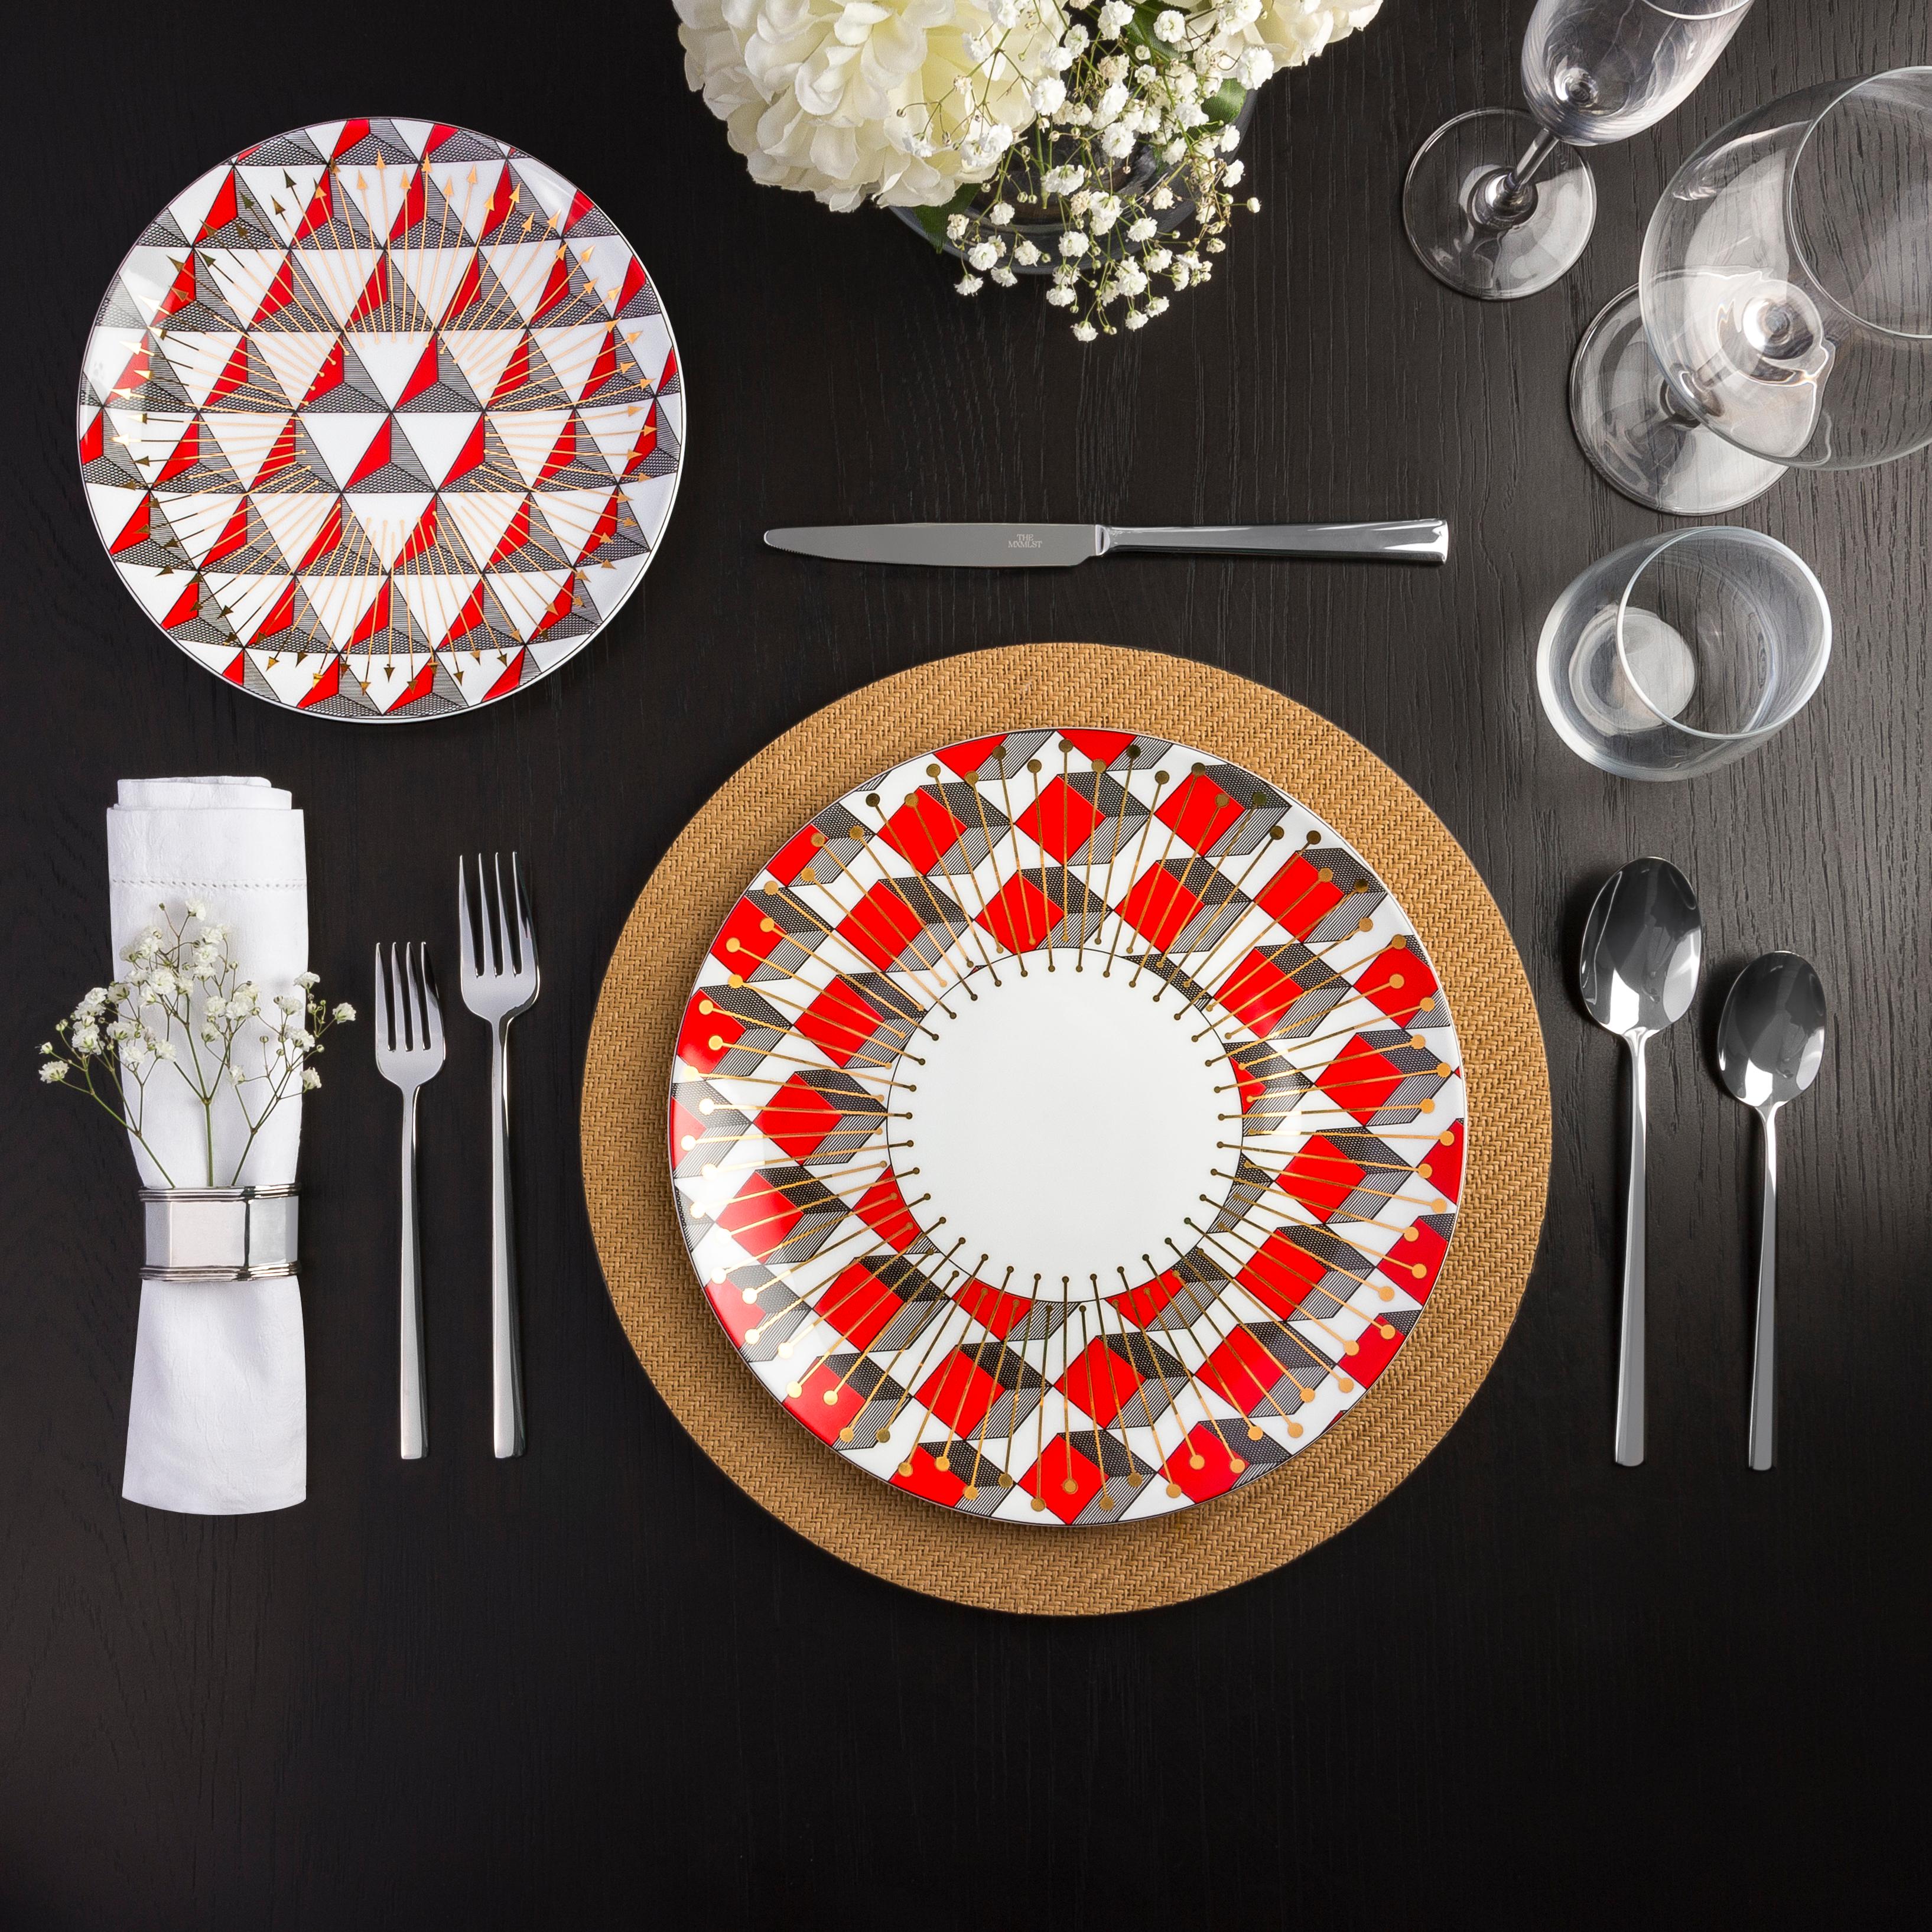 Our most versatile tableware set, Les Noëls dinner set features scarlet hexagon patterns accompanied with dynamic lines of gold. This dinner set will liven any formal or casual dining experience. Perfect for the summertime, perfect for the